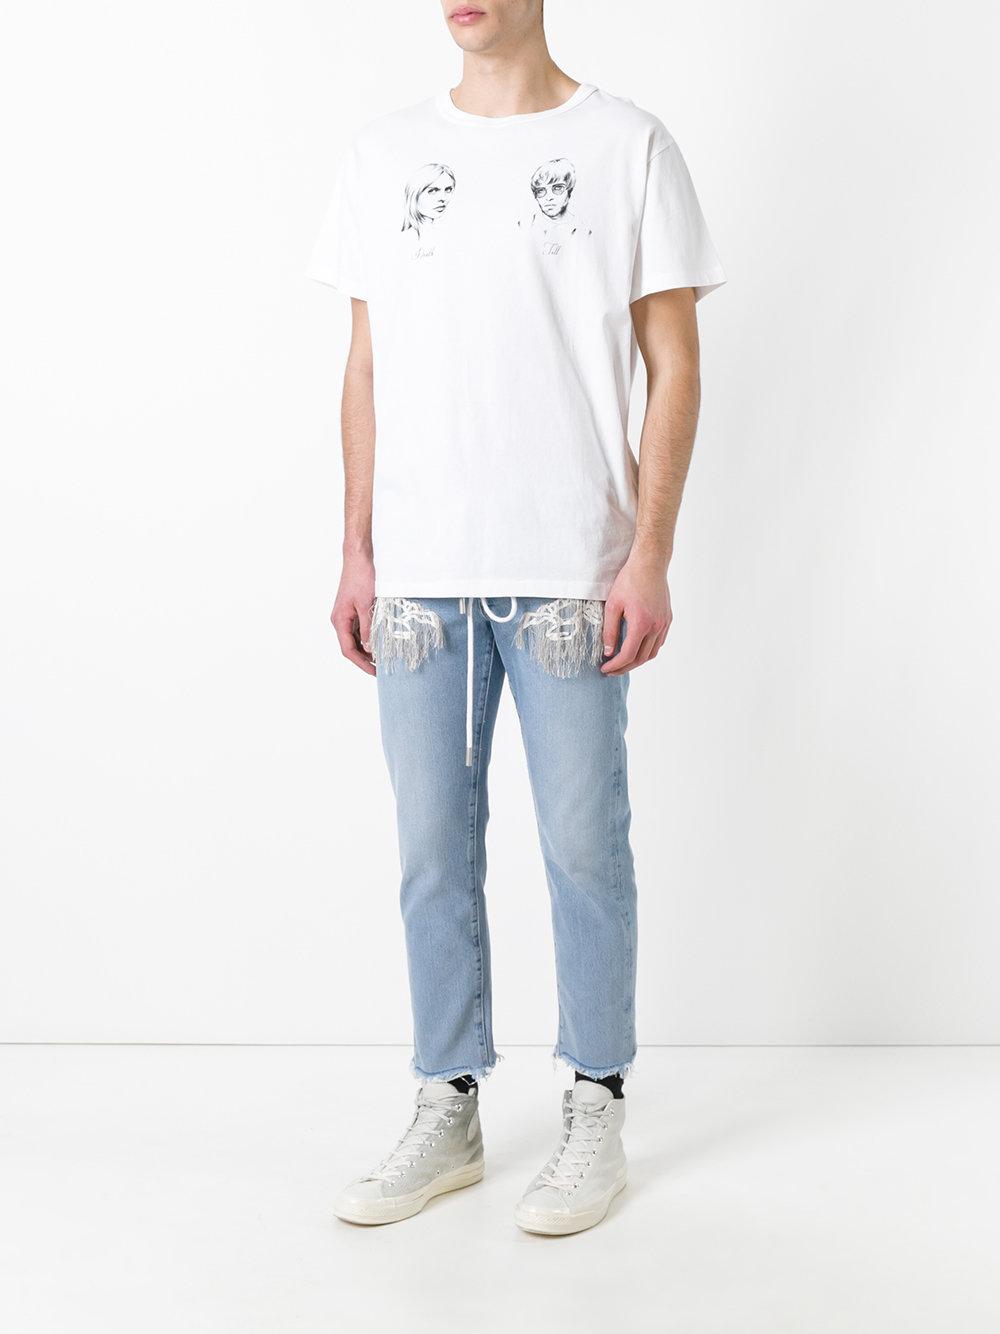 Off-White c/o Virgil Abloh Cotton Death And Jill T-shirt in White for Men -  Lyst